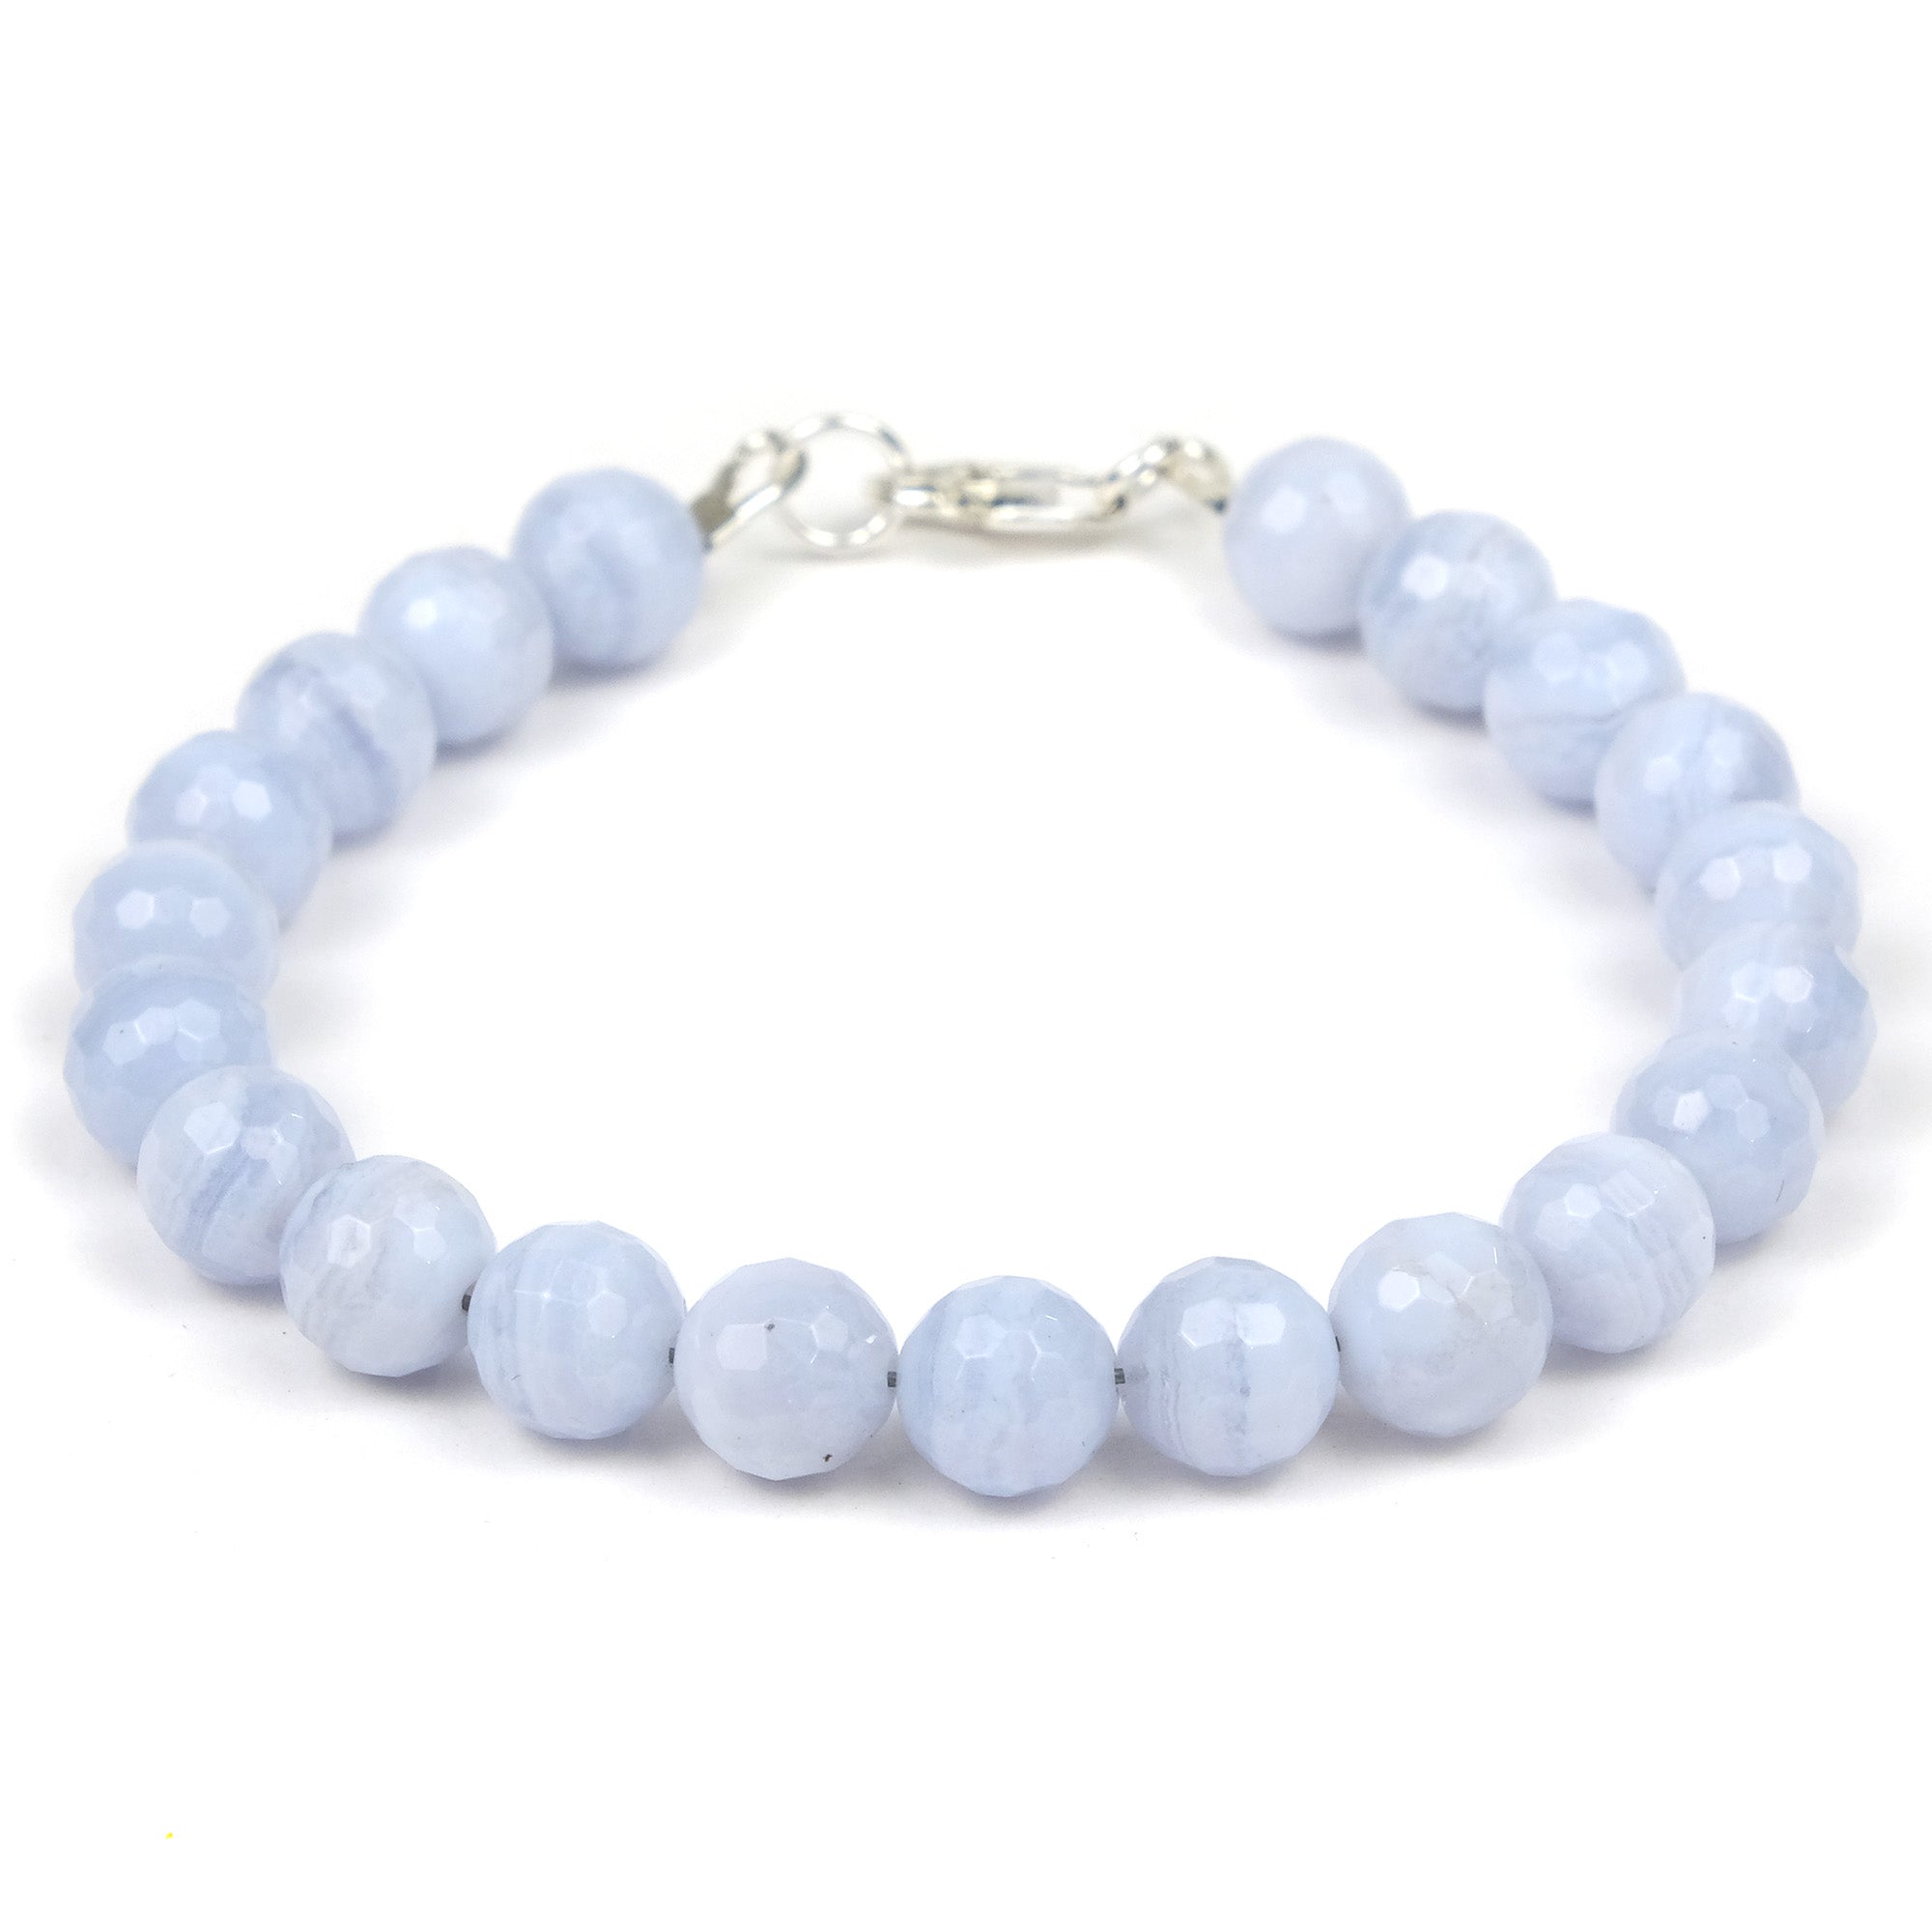 Blue Lace Agate Leather Bracelet | Made In Earth US